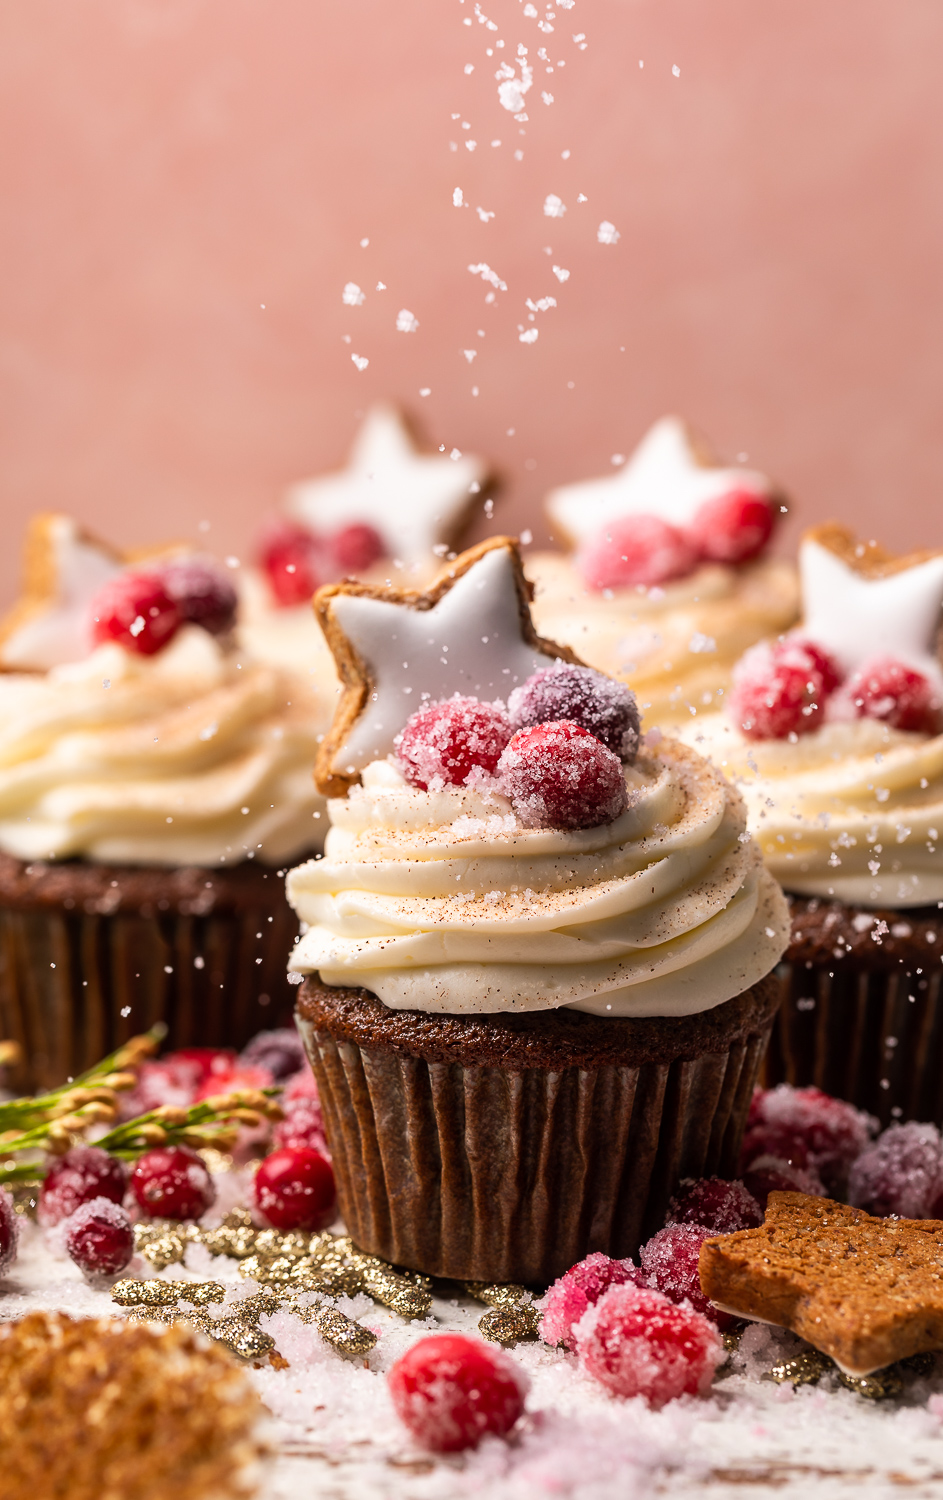 Gingerbread Cupcakes are topped with Mascarpone Frosting and Maple Candied Cranberries! Moist, fluffy, and so flavorful, these are a holiday classic! And the perfect crowd-pleasing holiday dessert recipe for your next party!